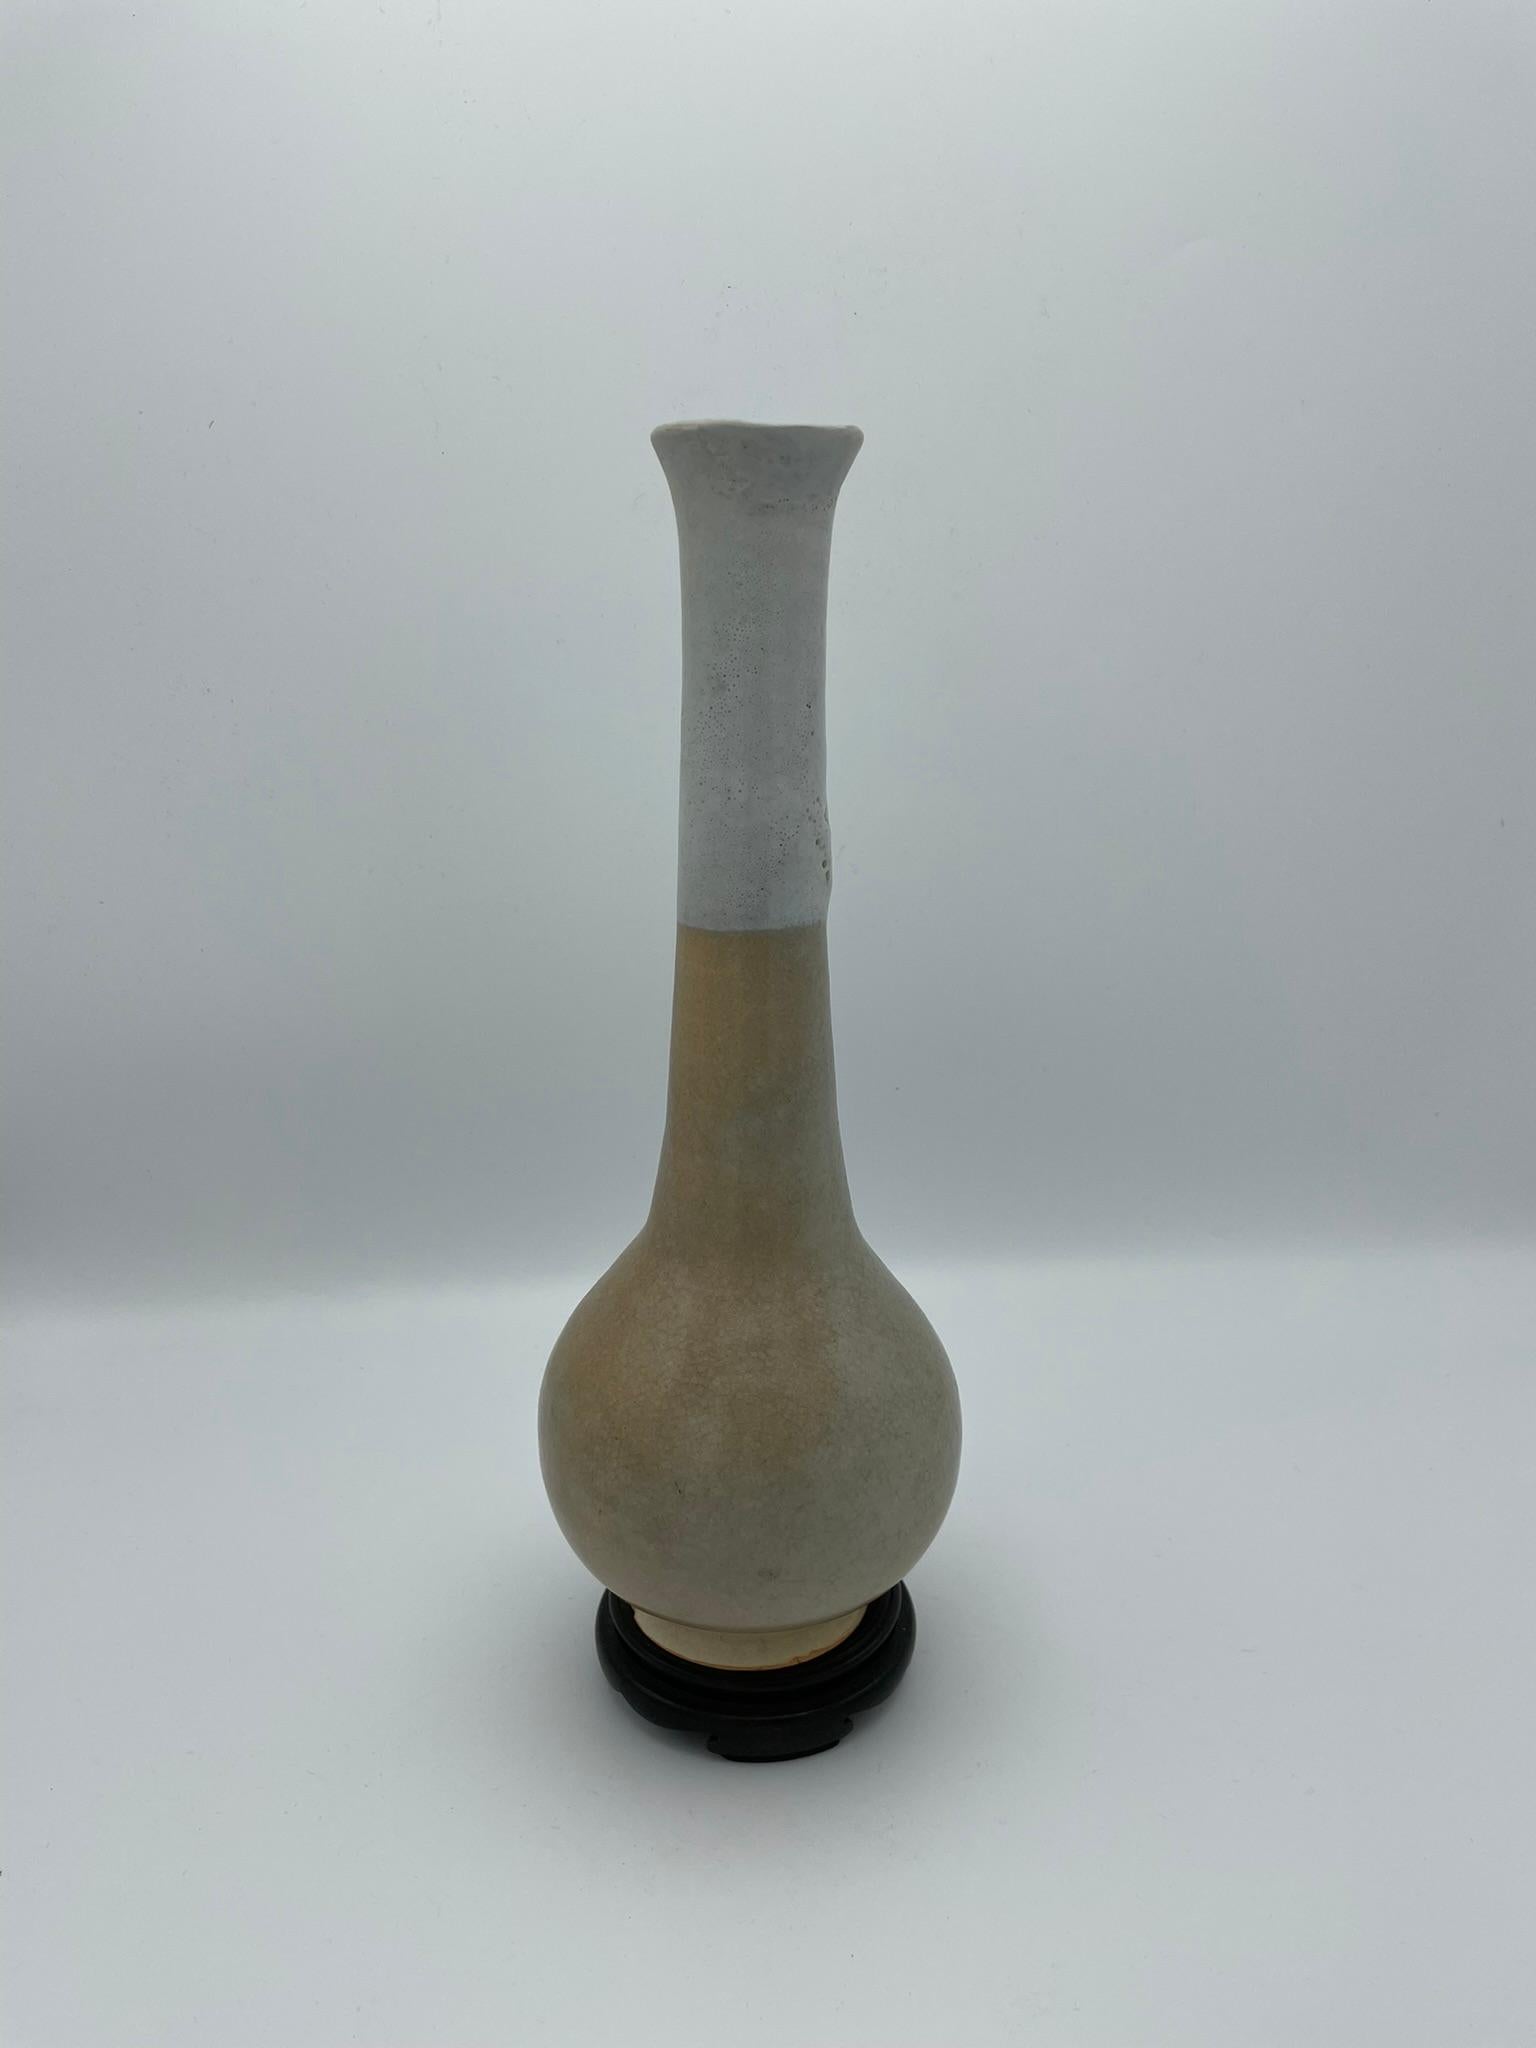 This is a flower vase made in 1970s. It is made with Style Hagi (Hagi-yaki) in Hagi city, Yamaguchi prefecture.
Hagi-yaki (Hagi ware)'s distinguishing feature is its simple shape taken from the texture of the earth. Although the pieces appear as if